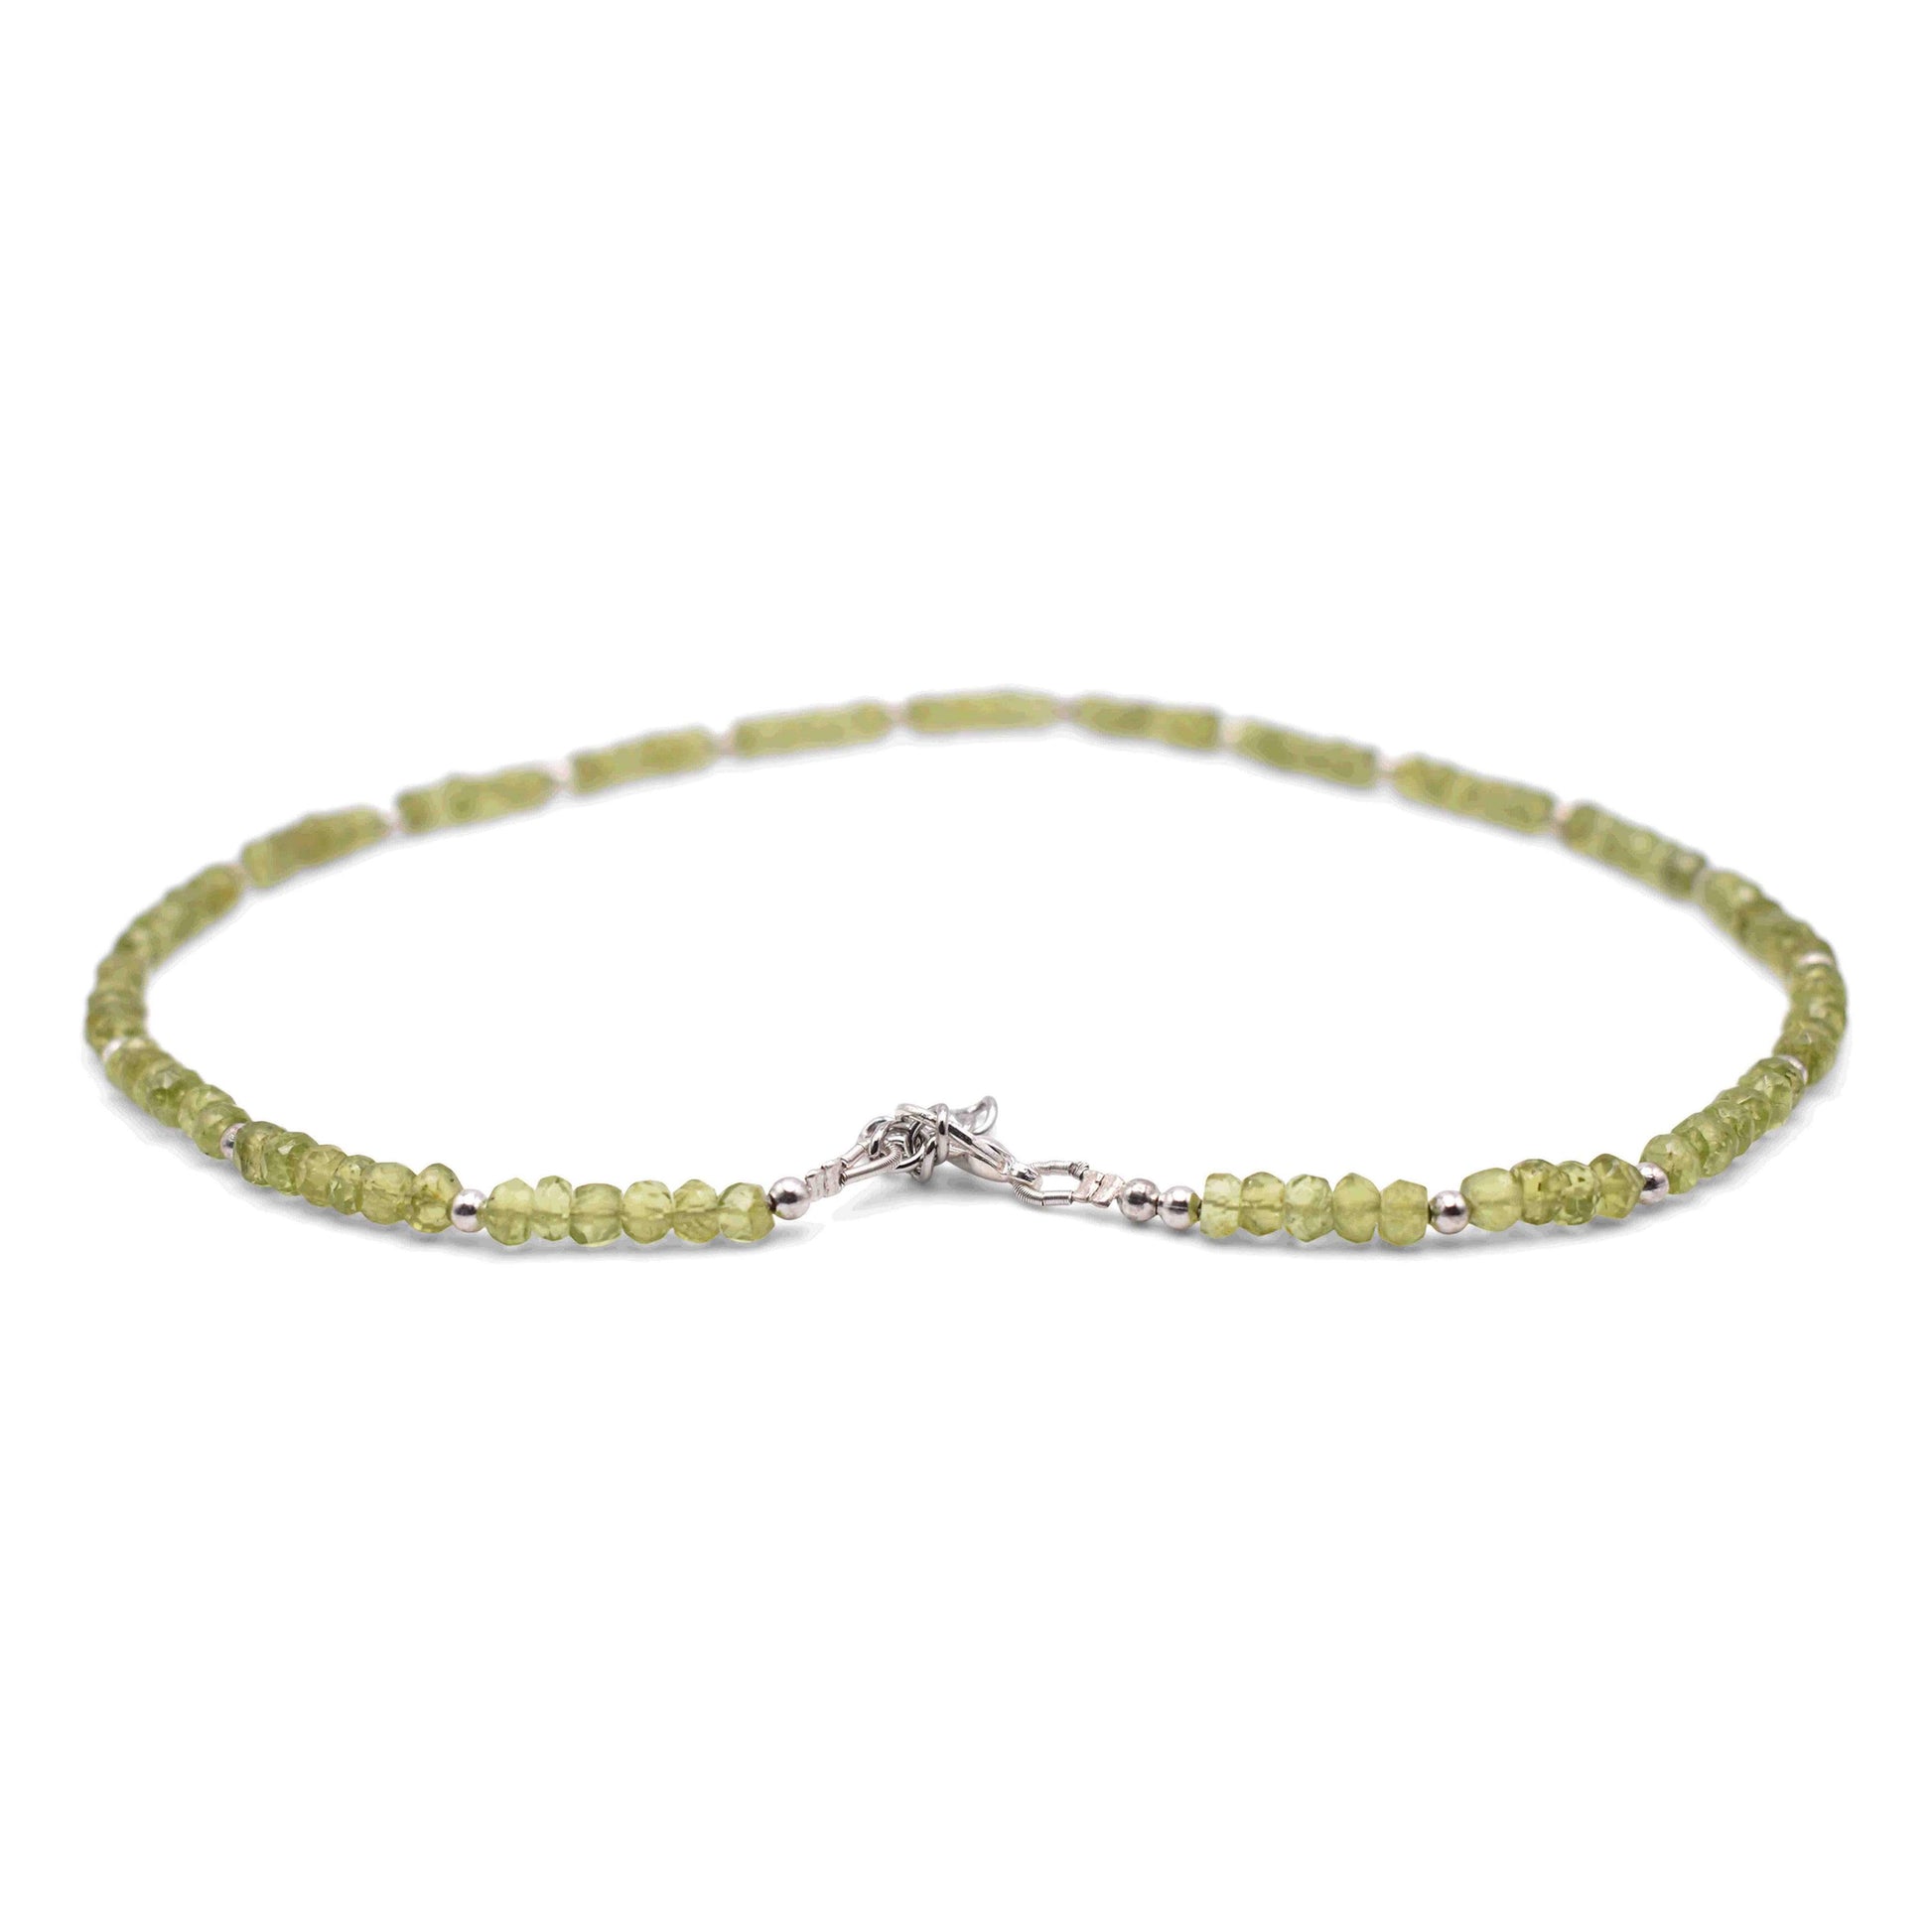 Peridot Faceted Cut Stone Necklace - Mystic Gleam